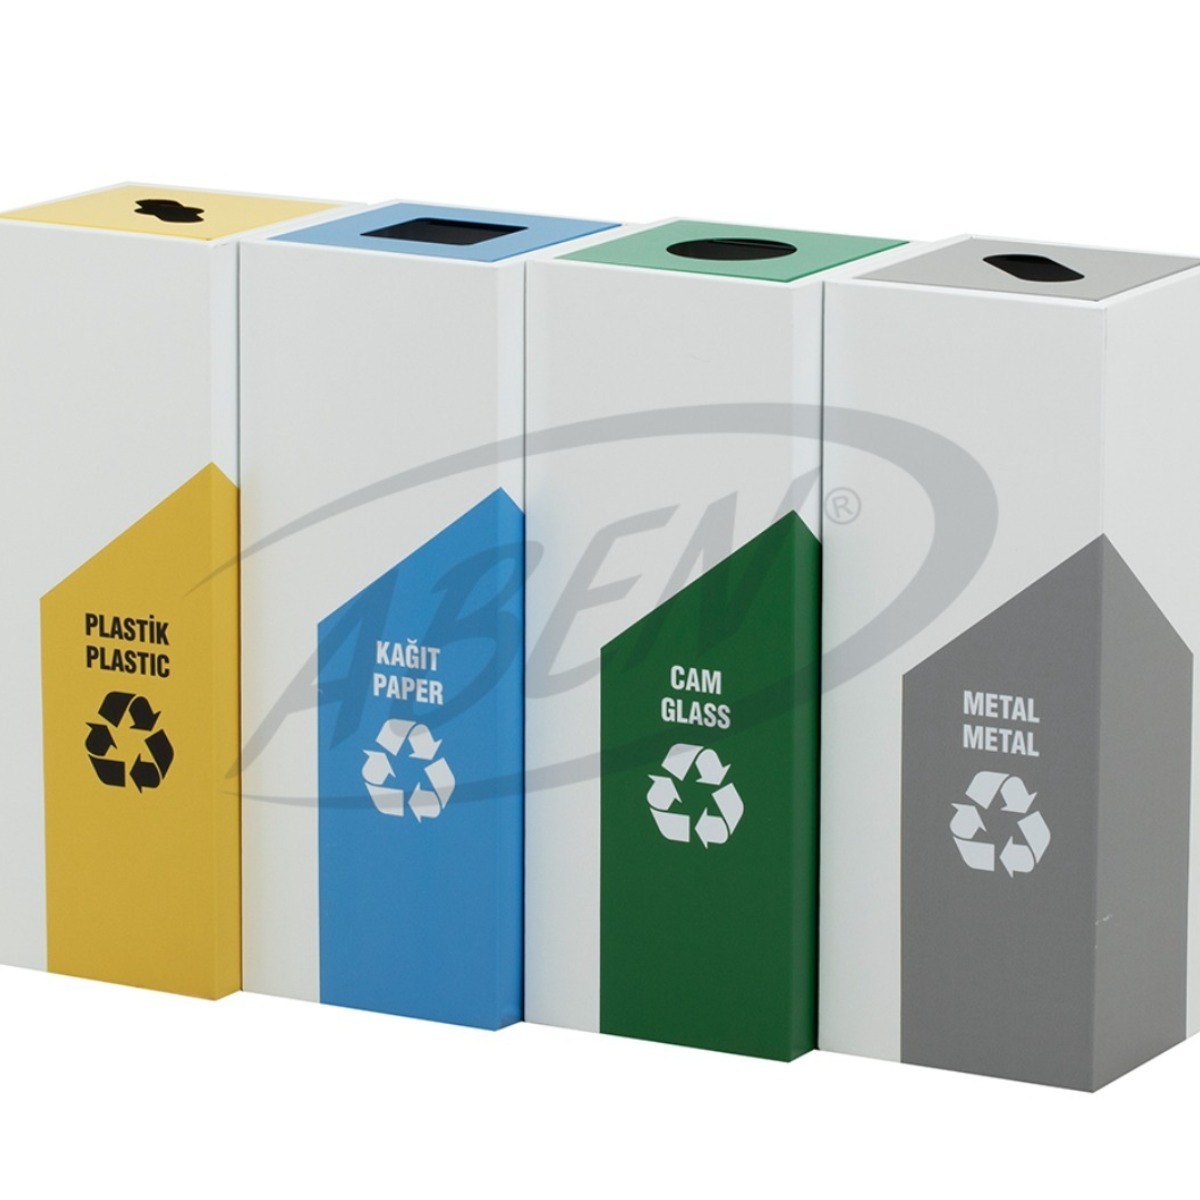 AB-725 4’Part Recycle Bin